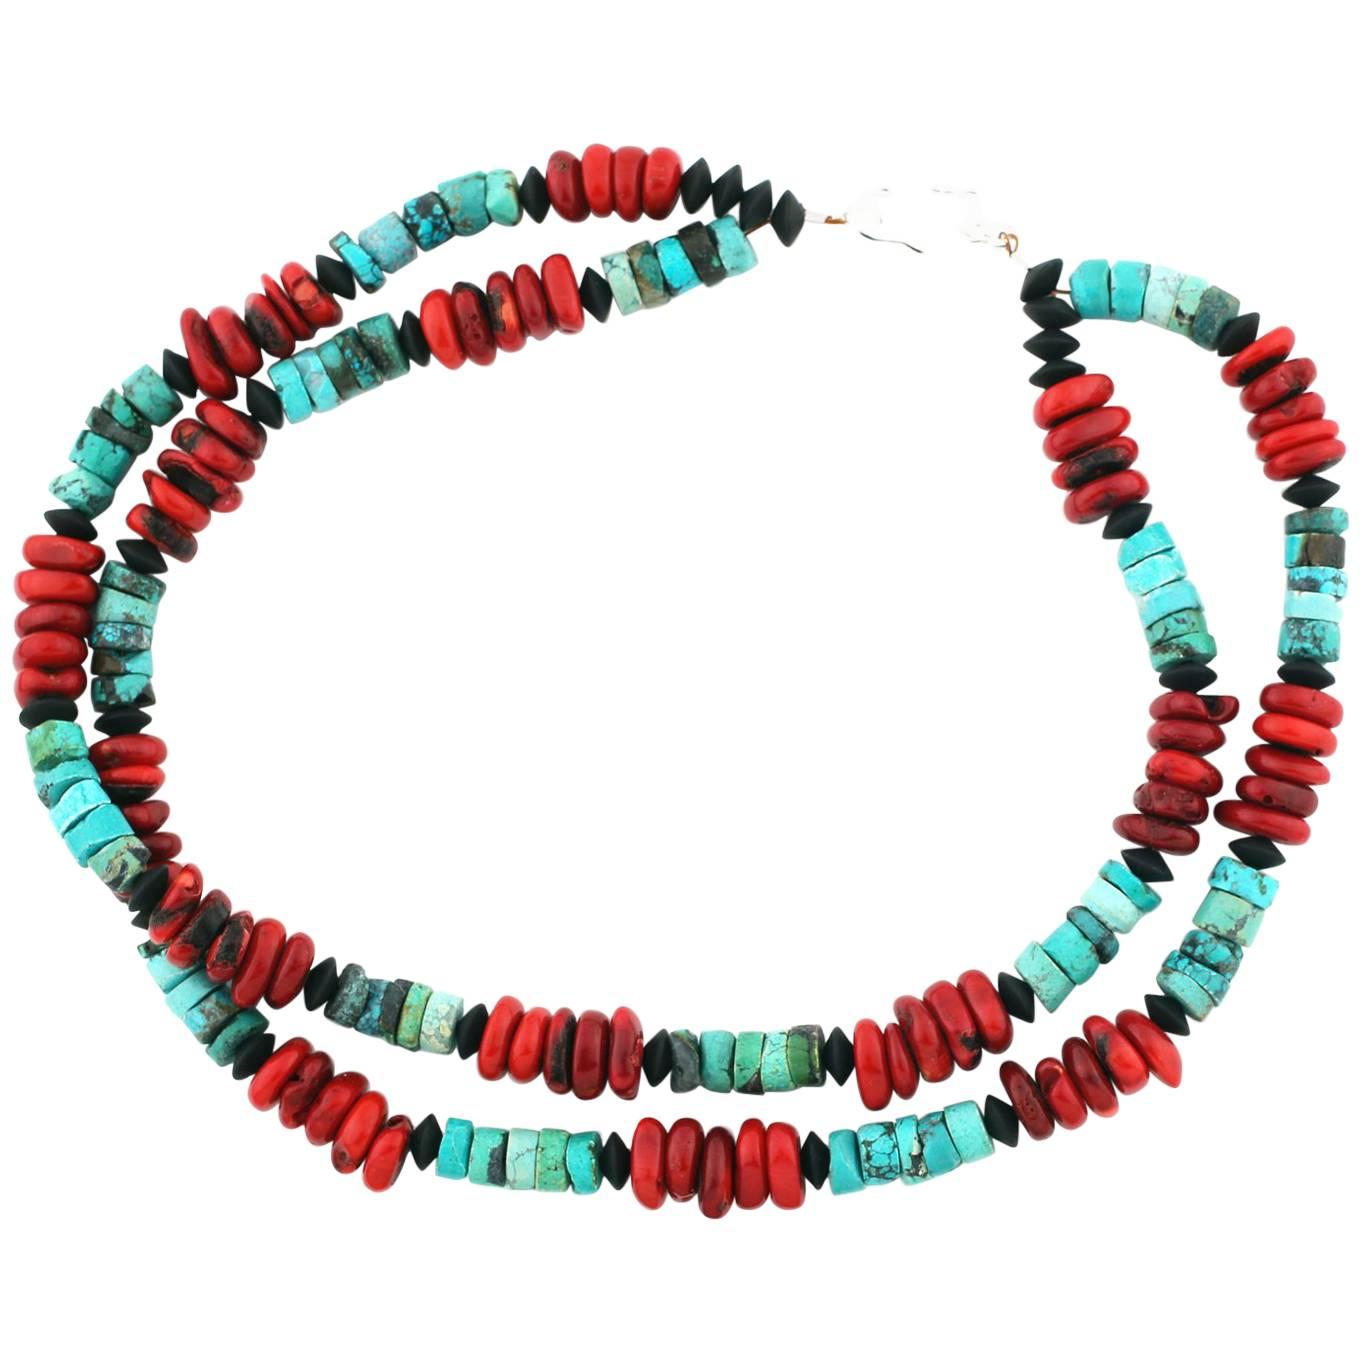 Gemjunky Exquisite Double Strand Turquoise and Bamboo Coral Necklace